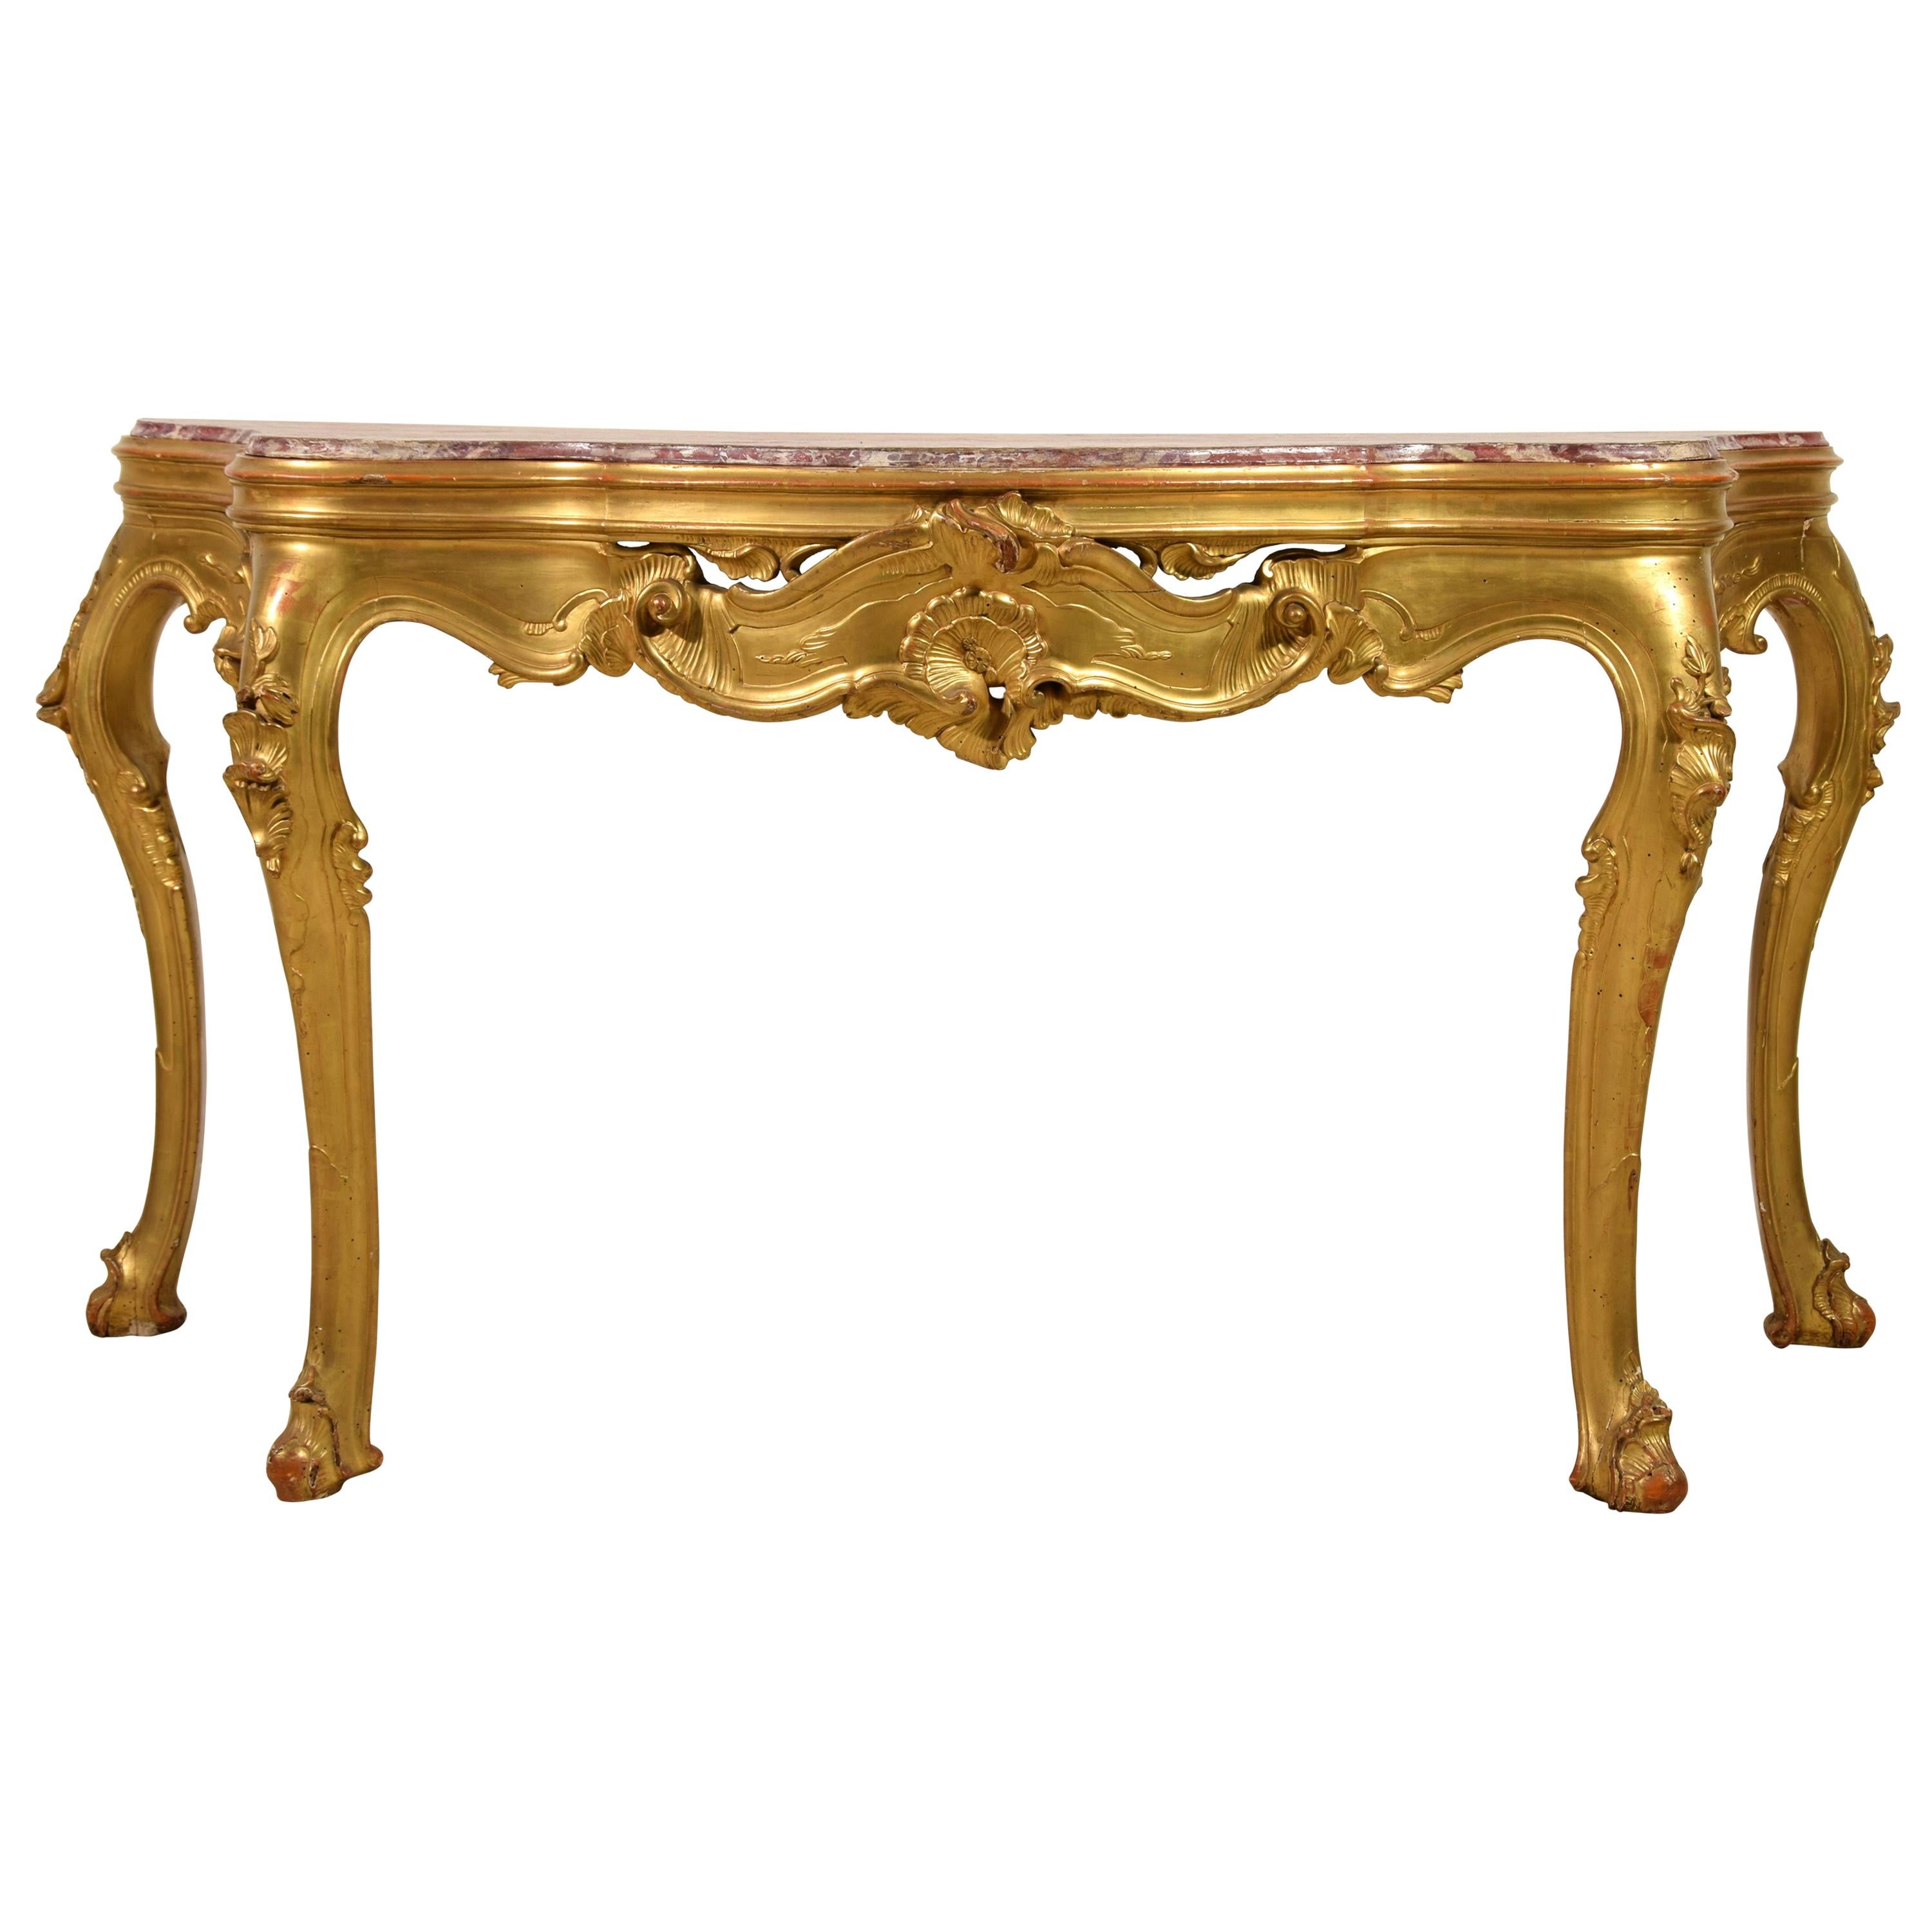 19th Century, Venetian Carved Giltwood Console Table